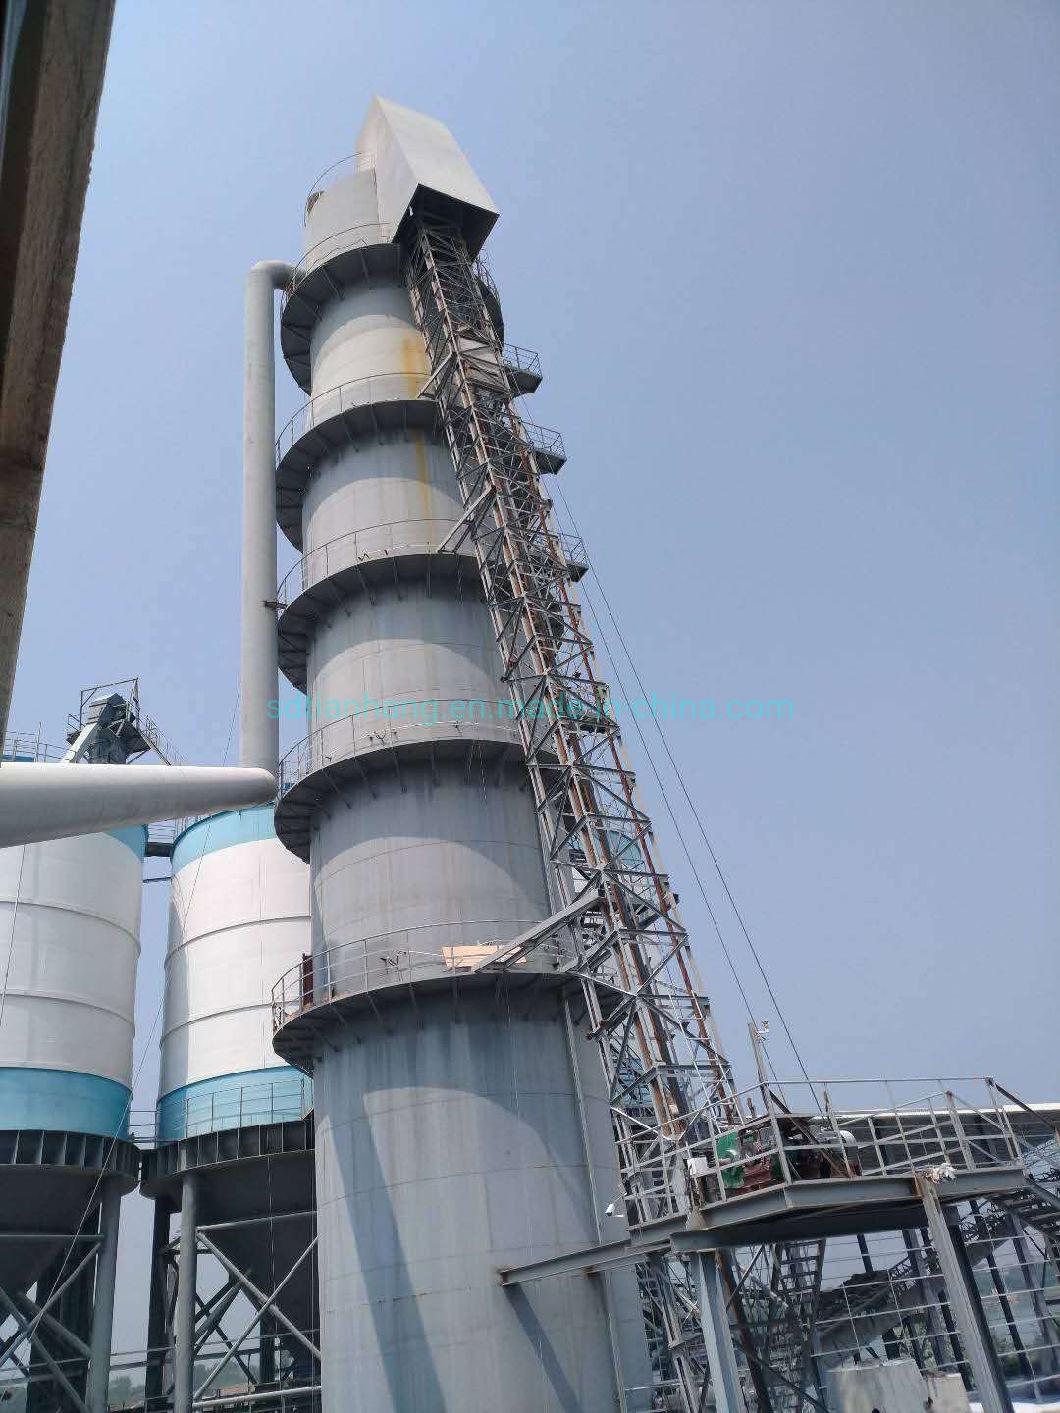 Cement Vertical Shaft Kiln China Cement Plant Vertical Shaft Lime Kiln